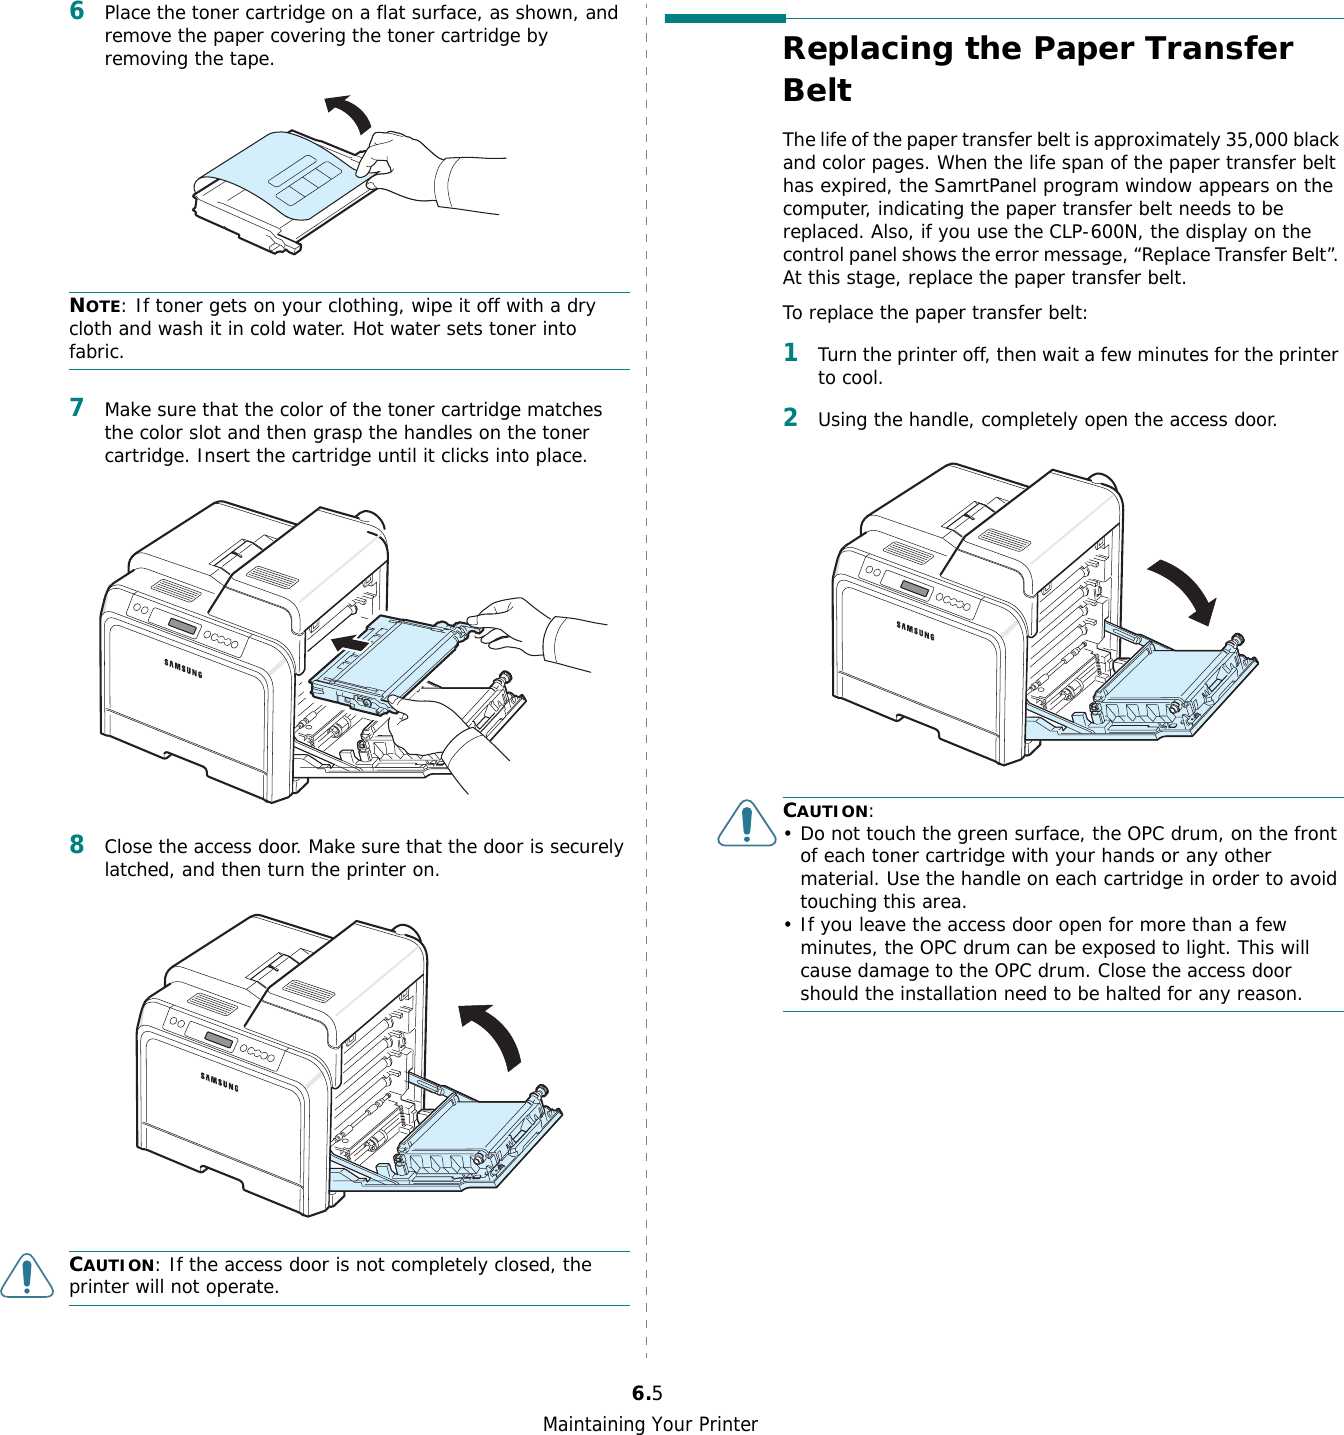 Maintaining Your Printer6.56Place the toner cartridge on a flat surface, as shown, and remove the paper covering the toner cartridge by removing the tape.NOTE: If toner gets on your clothing, wipe it off with a dry cloth and wash it in cold water. Hot water sets toner into fabric.7Make sure that the color of the toner cartridge matches the color slot and then grasp the handles on the toner cartridge. Insert the cartridge until it clicks into place.8Close the access door. Make sure that the door is securely latched, and then turn the printer on. CAUTION: If the access door is not completely closed, the printer will not operate.Replacing the Paper Transfer BeltThe life of the paper transfer belt is approximately 35,000 black and color pages. When the life span of the paper transfer belt has expired, the SamrtPanel program window appears on the computer, indicating the paper transfer belt needs to be replaced. Also, if you use the CLP-600N, the display on the control panel shows the error message, “Replace Transfer Belt”. At this stage, replace the paper transfer belt.To replace the paper transfer belt:1Turn the printer off, then wait a few minutes for the printer to cool.2Using the handle, completely open the access door. CAUTION:• Do not touch the green surface, the OPC drum, on the front of each toner cartridge with your hands or any other material. Use the handle on each cartridge in order to avoid touching this area.• If you leave the access door open for more than a few minutes, the OPC drum can be exposed to light. This will cause damage to the OPC drum. Close the access door should the installation need to be halted for any reason.